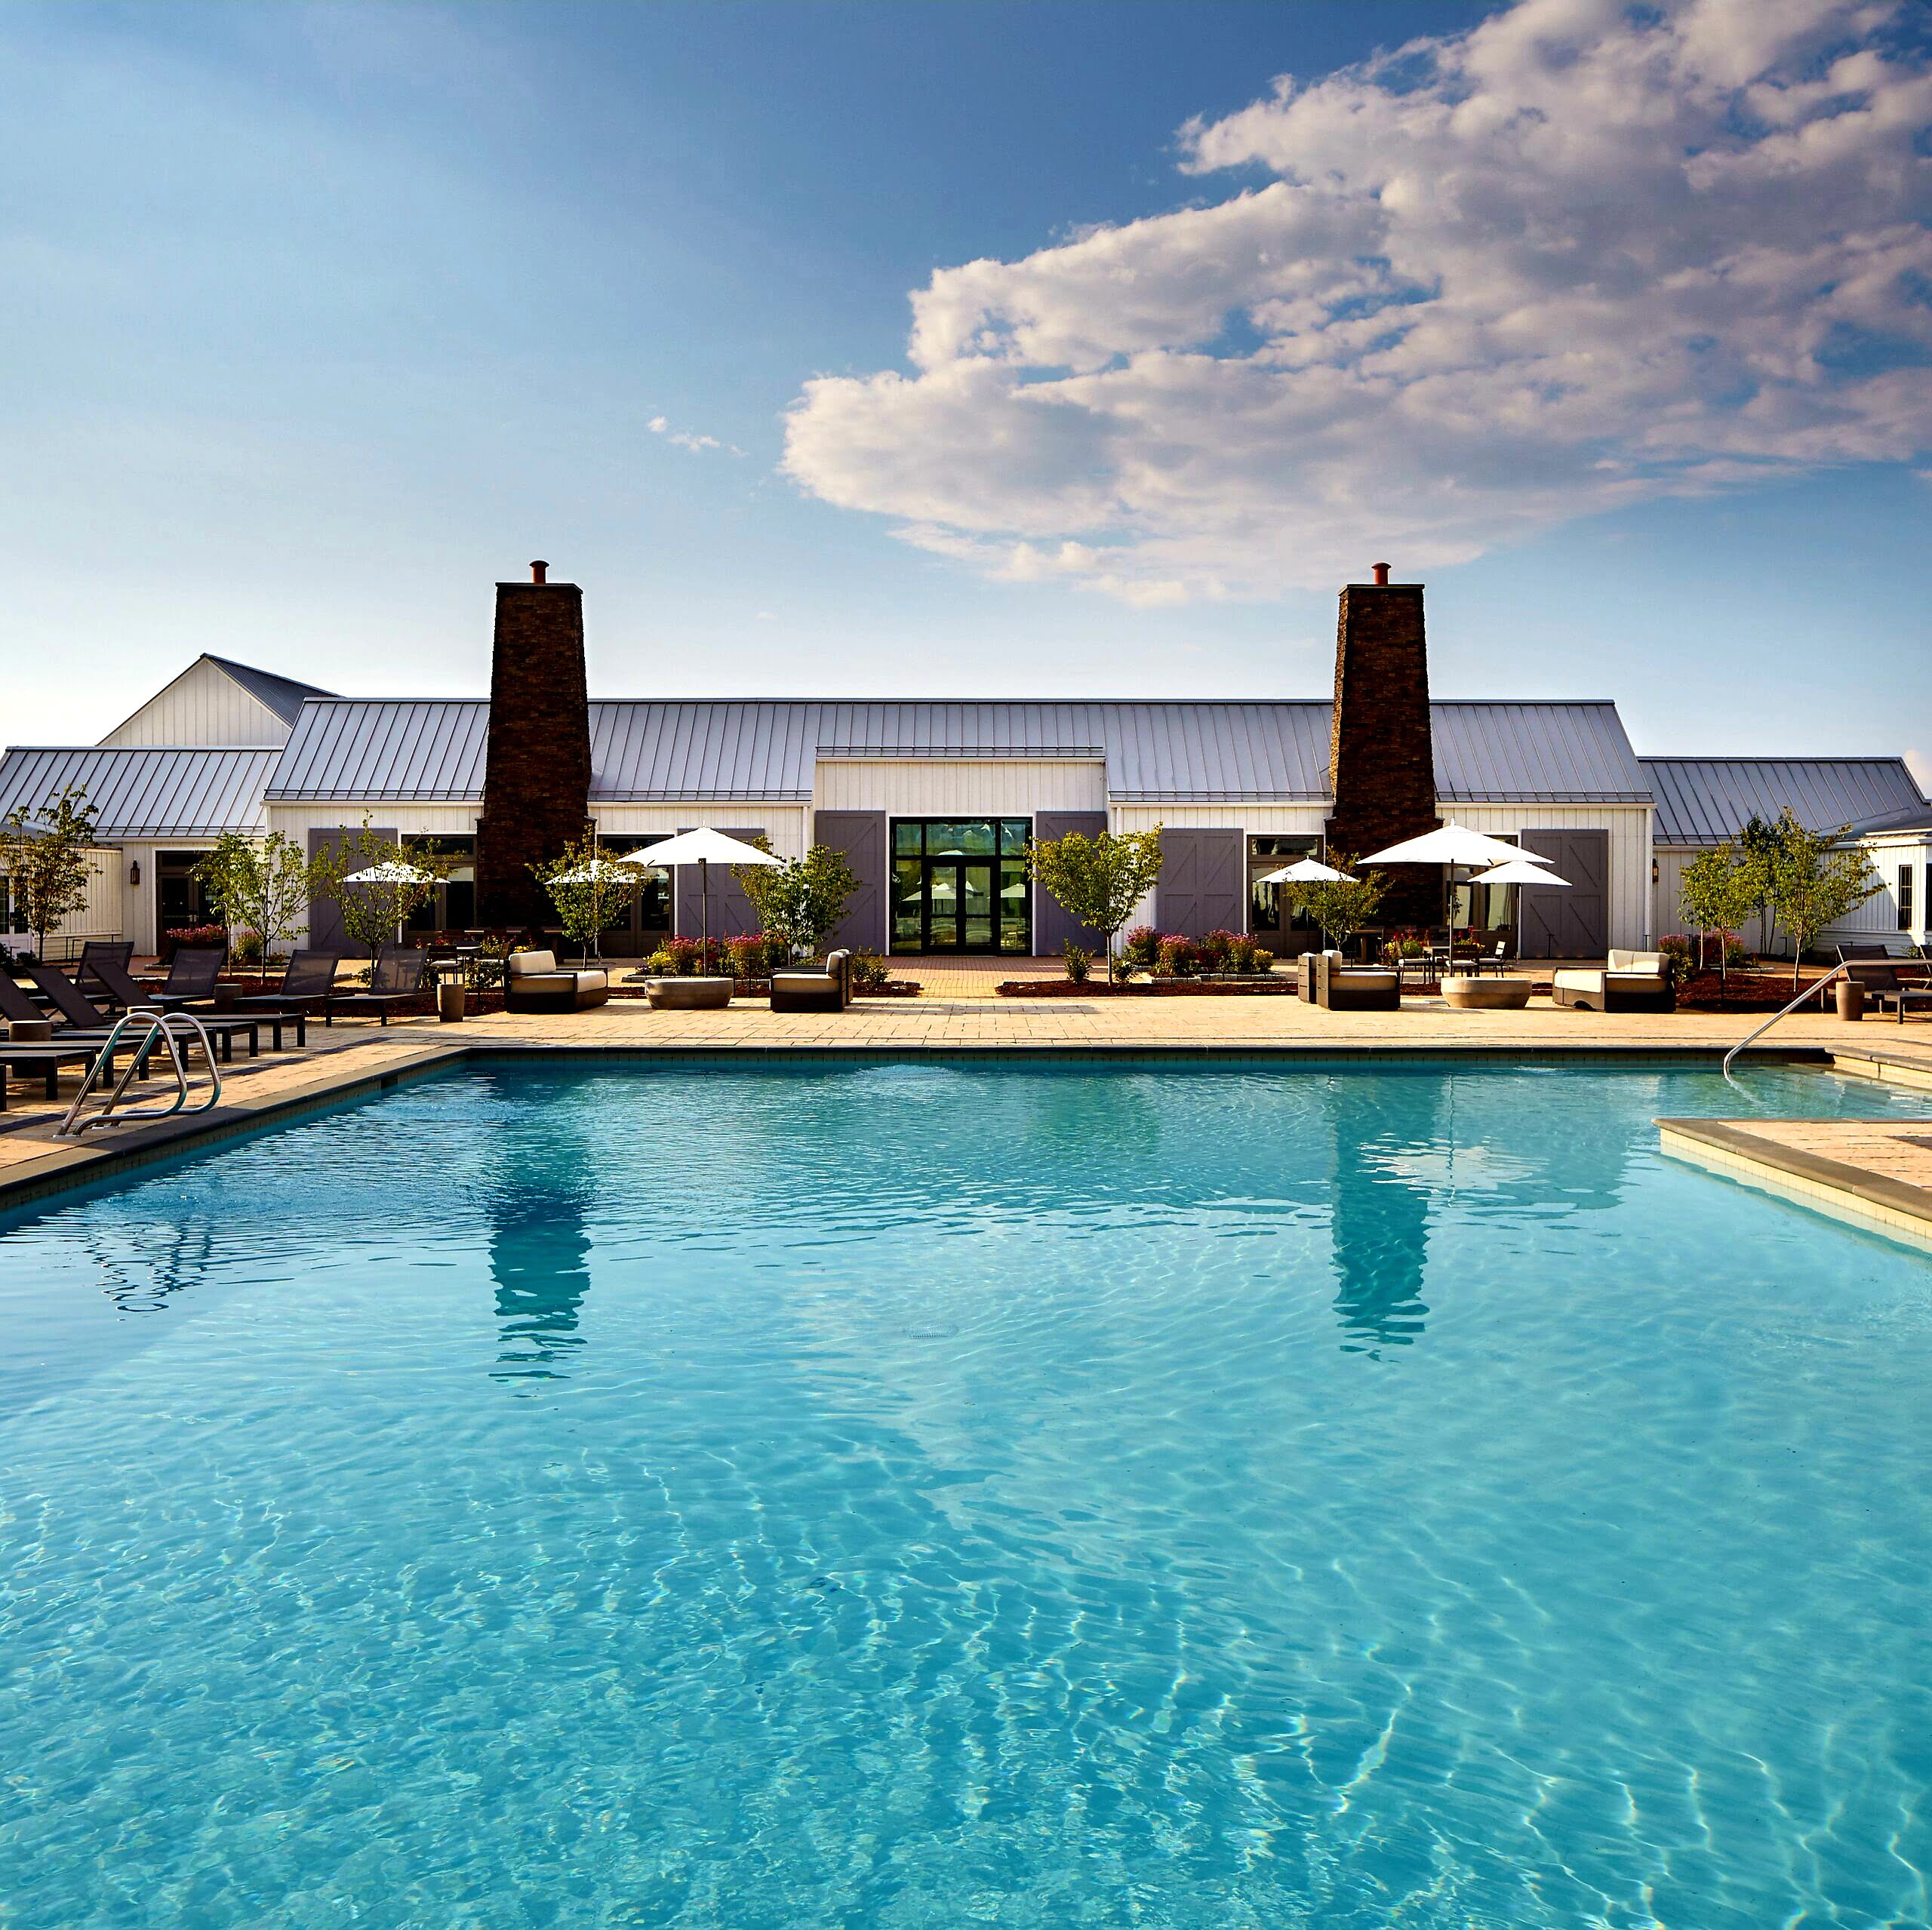 Miraval Berkshires Pool via Team One USA for use by 360 Magazine